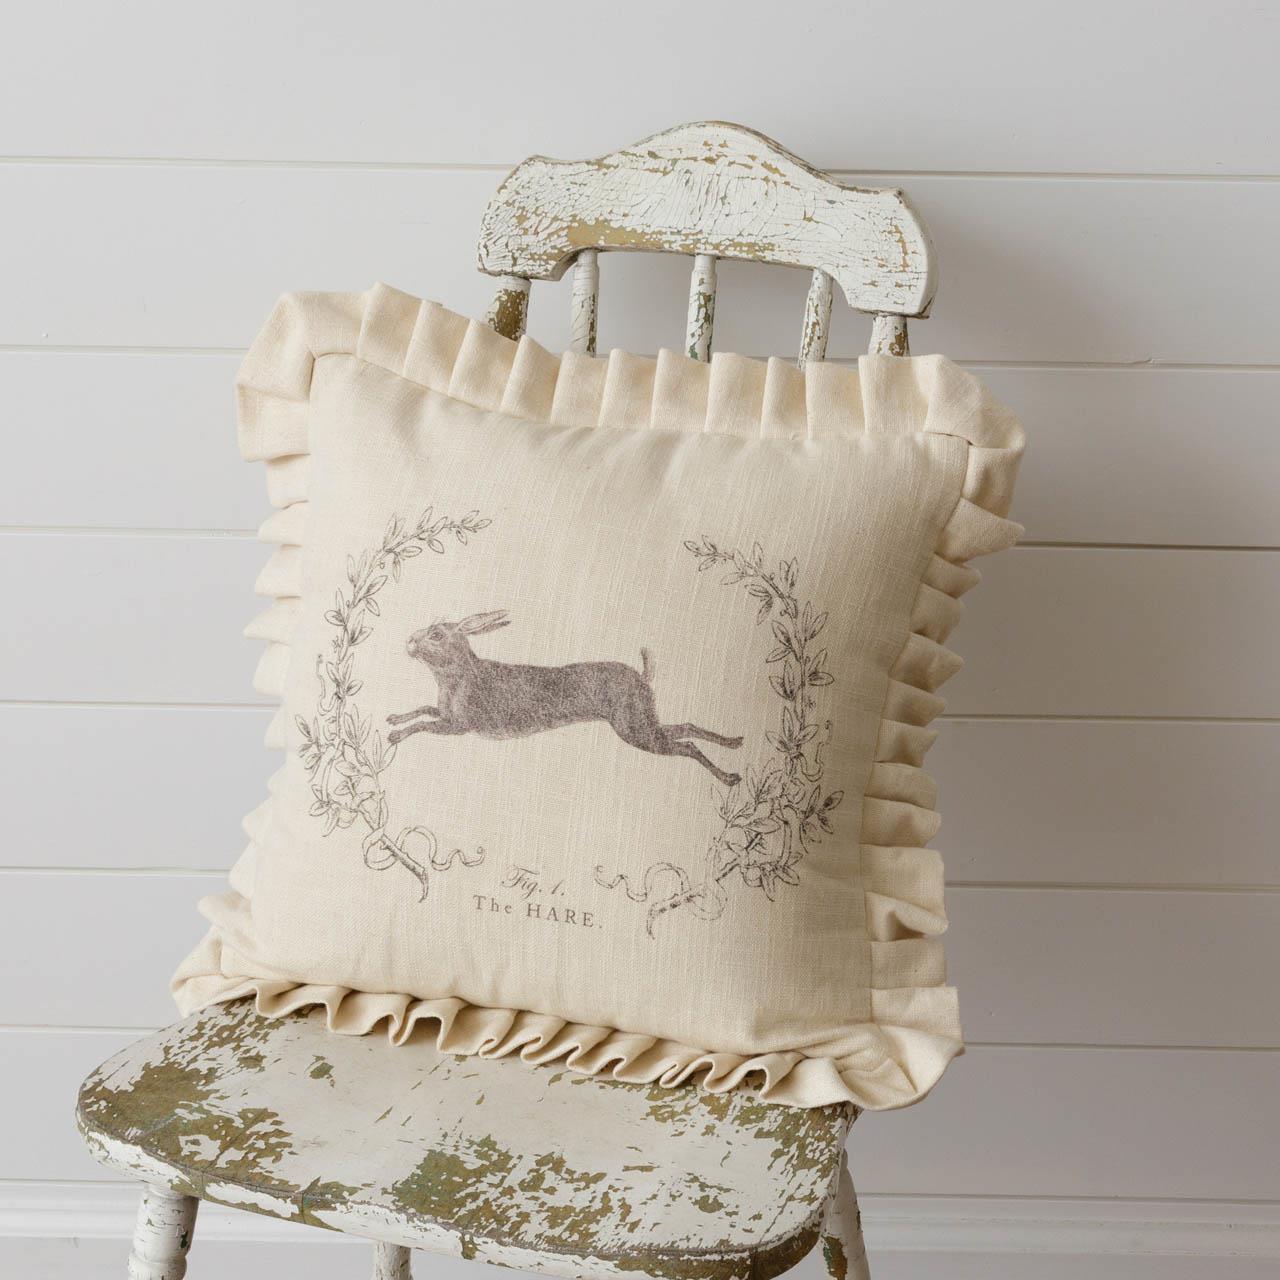 Leaping Hare Pillow